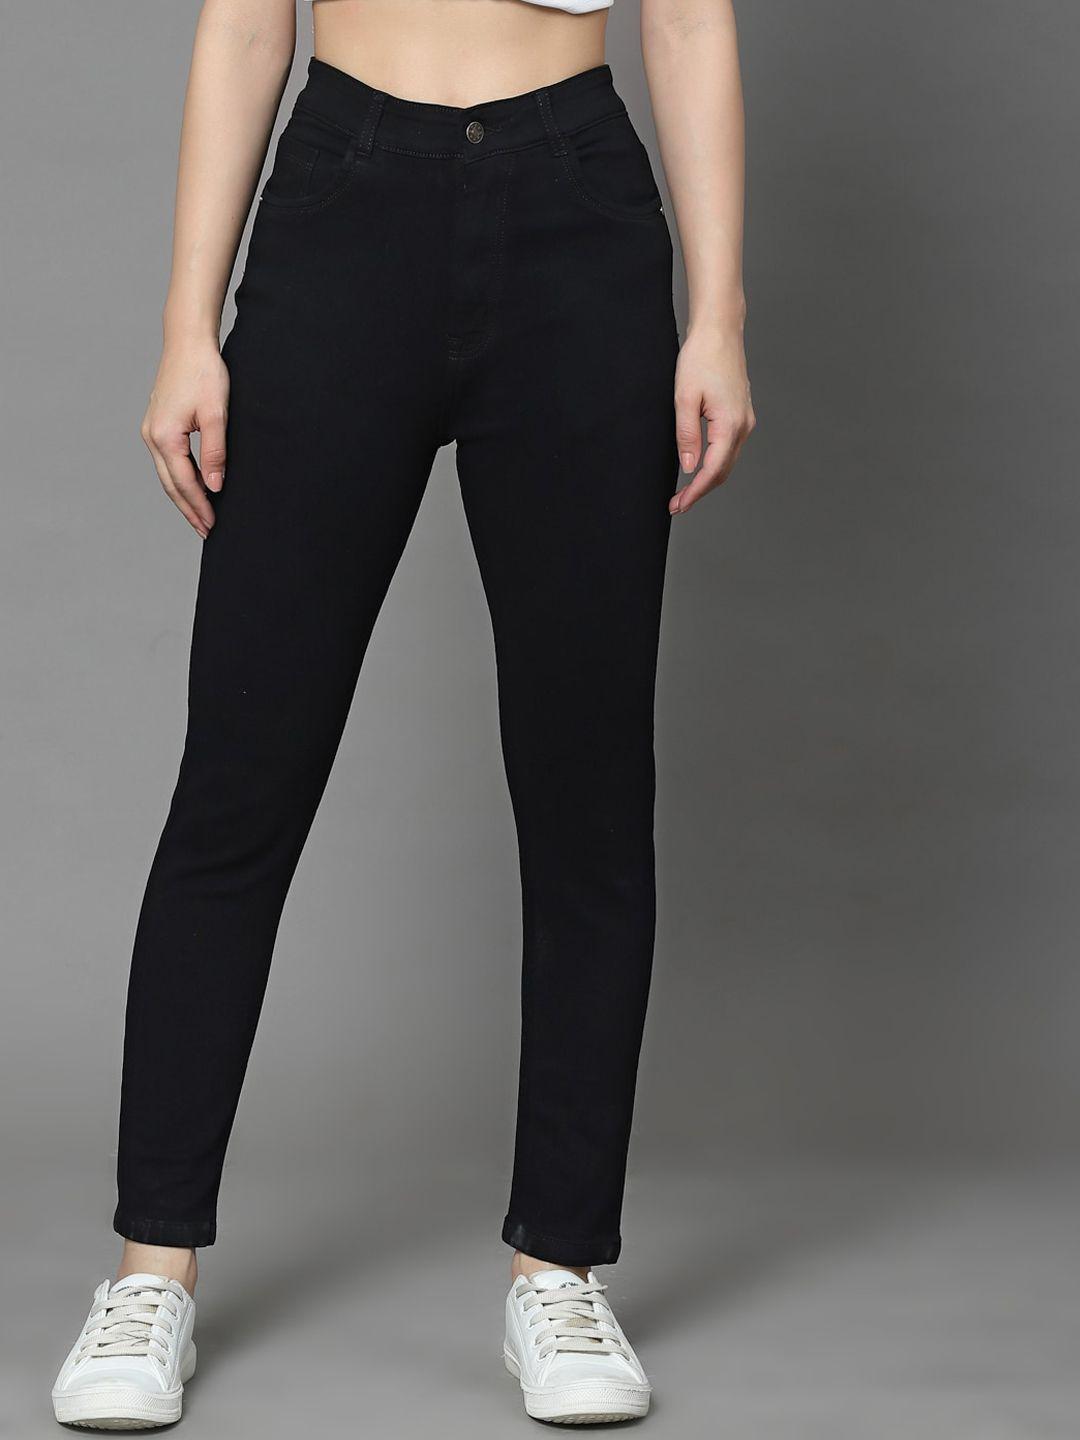 kassually women black slim fit stretchable jeans